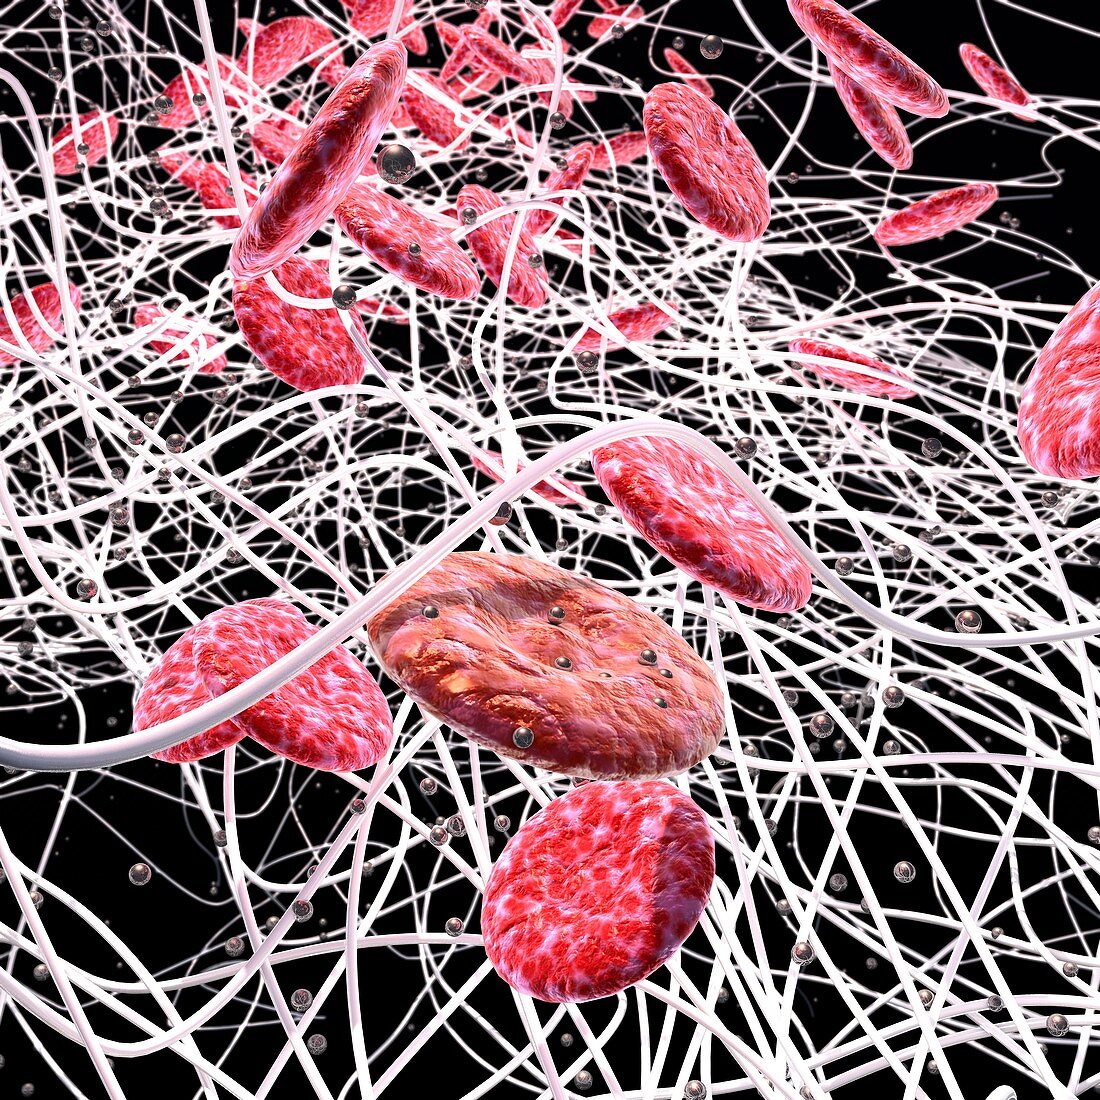 Iron nanoparticles in blood, conceptual illustration